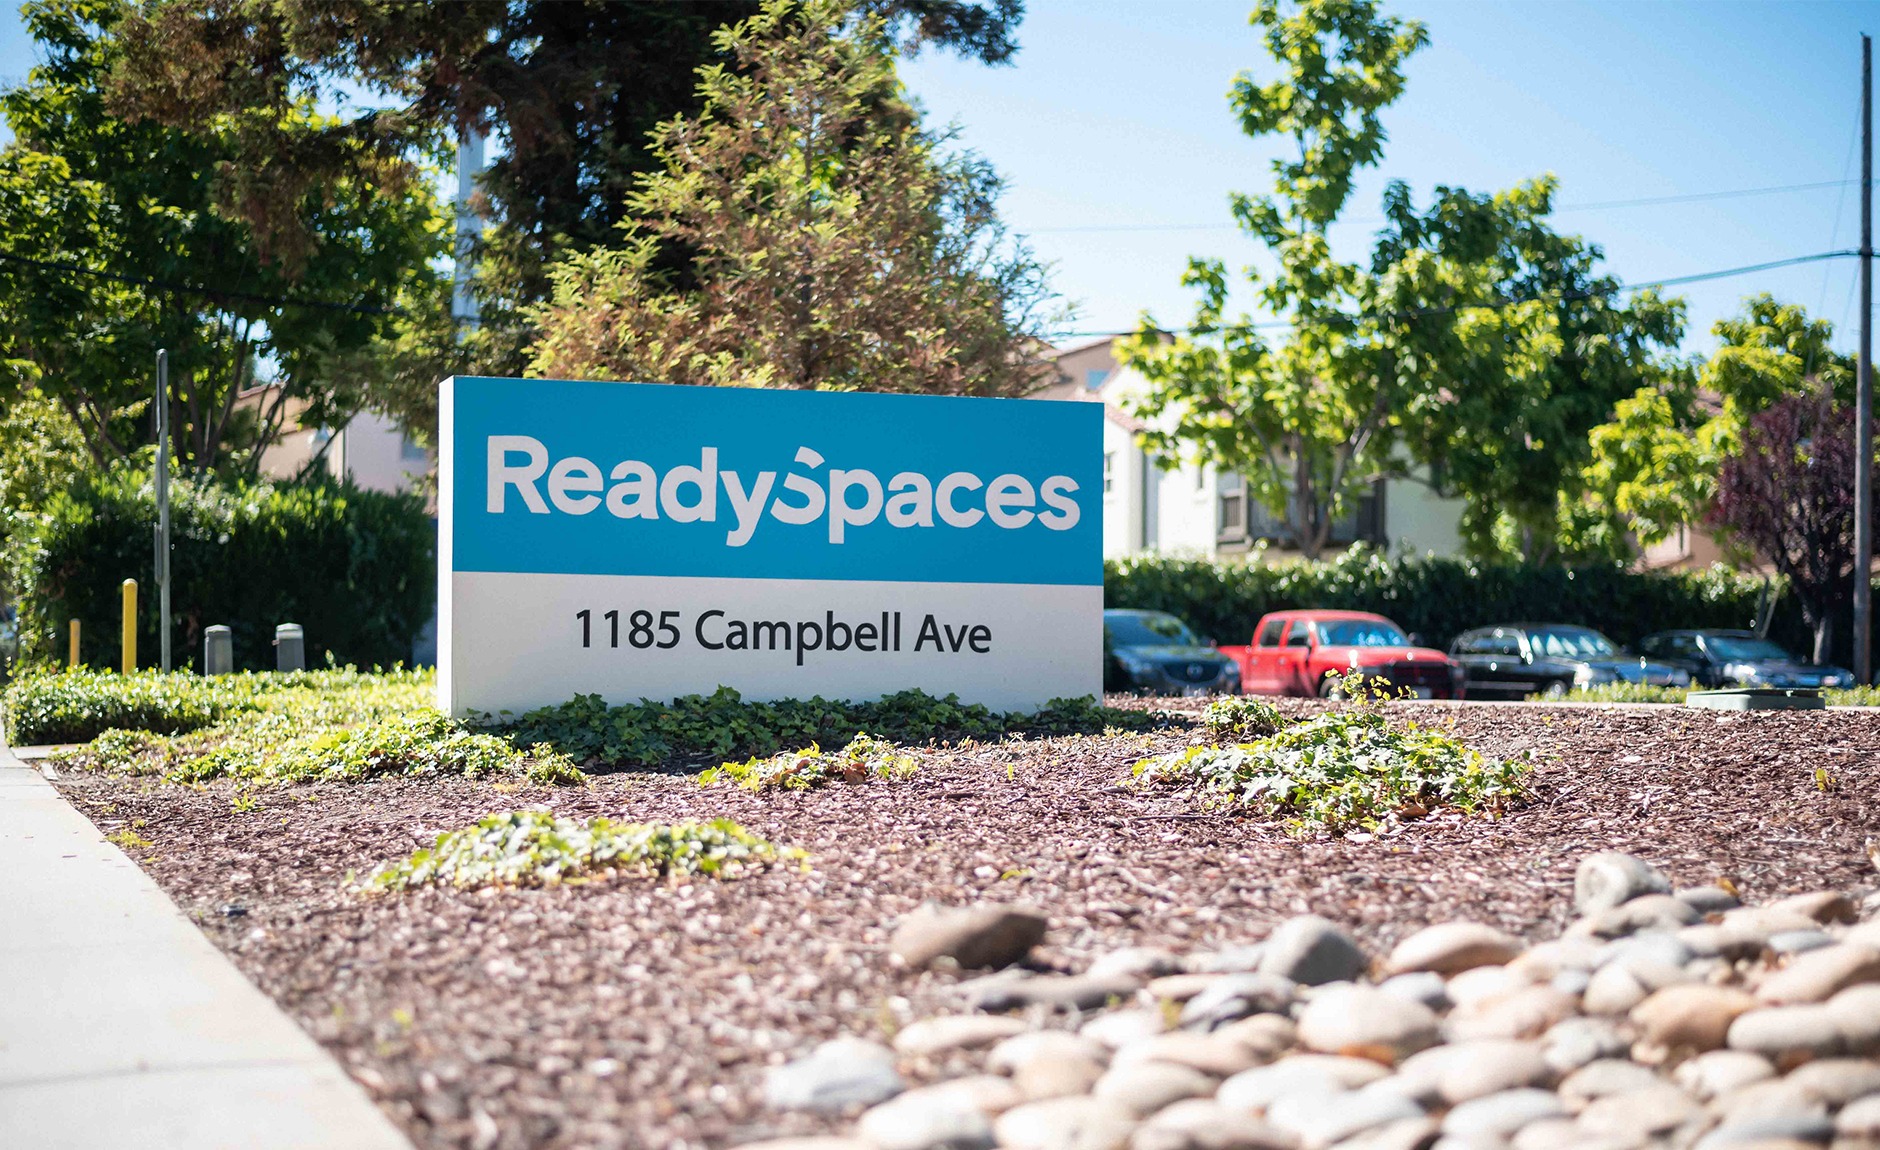 A sign for readyspaces in front of a building.